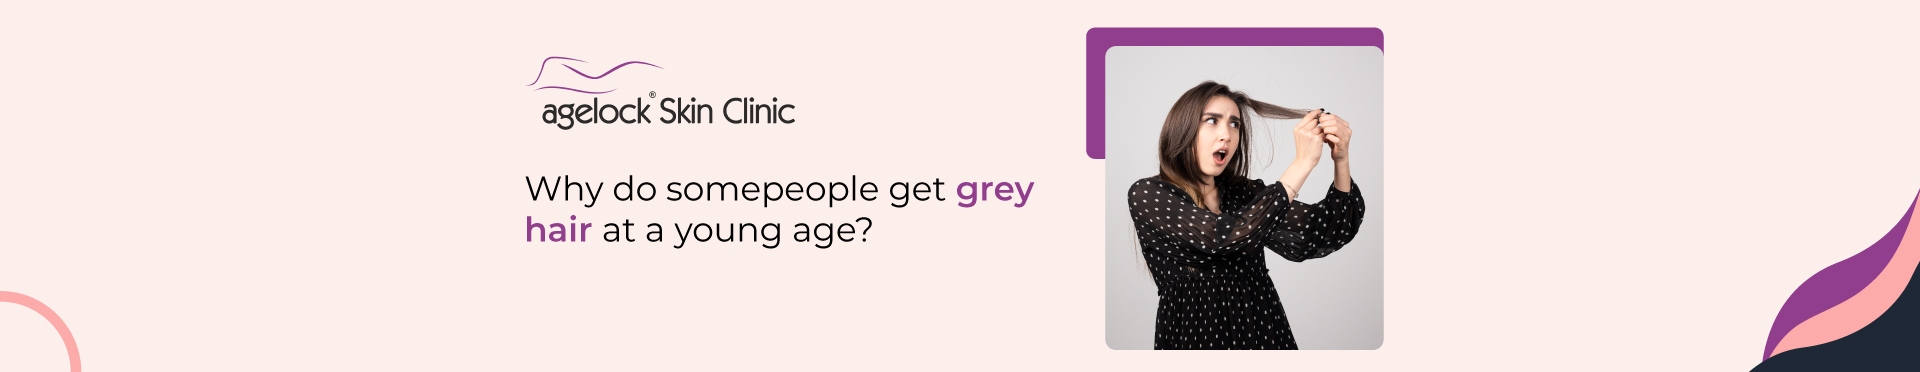 Why do some people get grey hair at a young age?